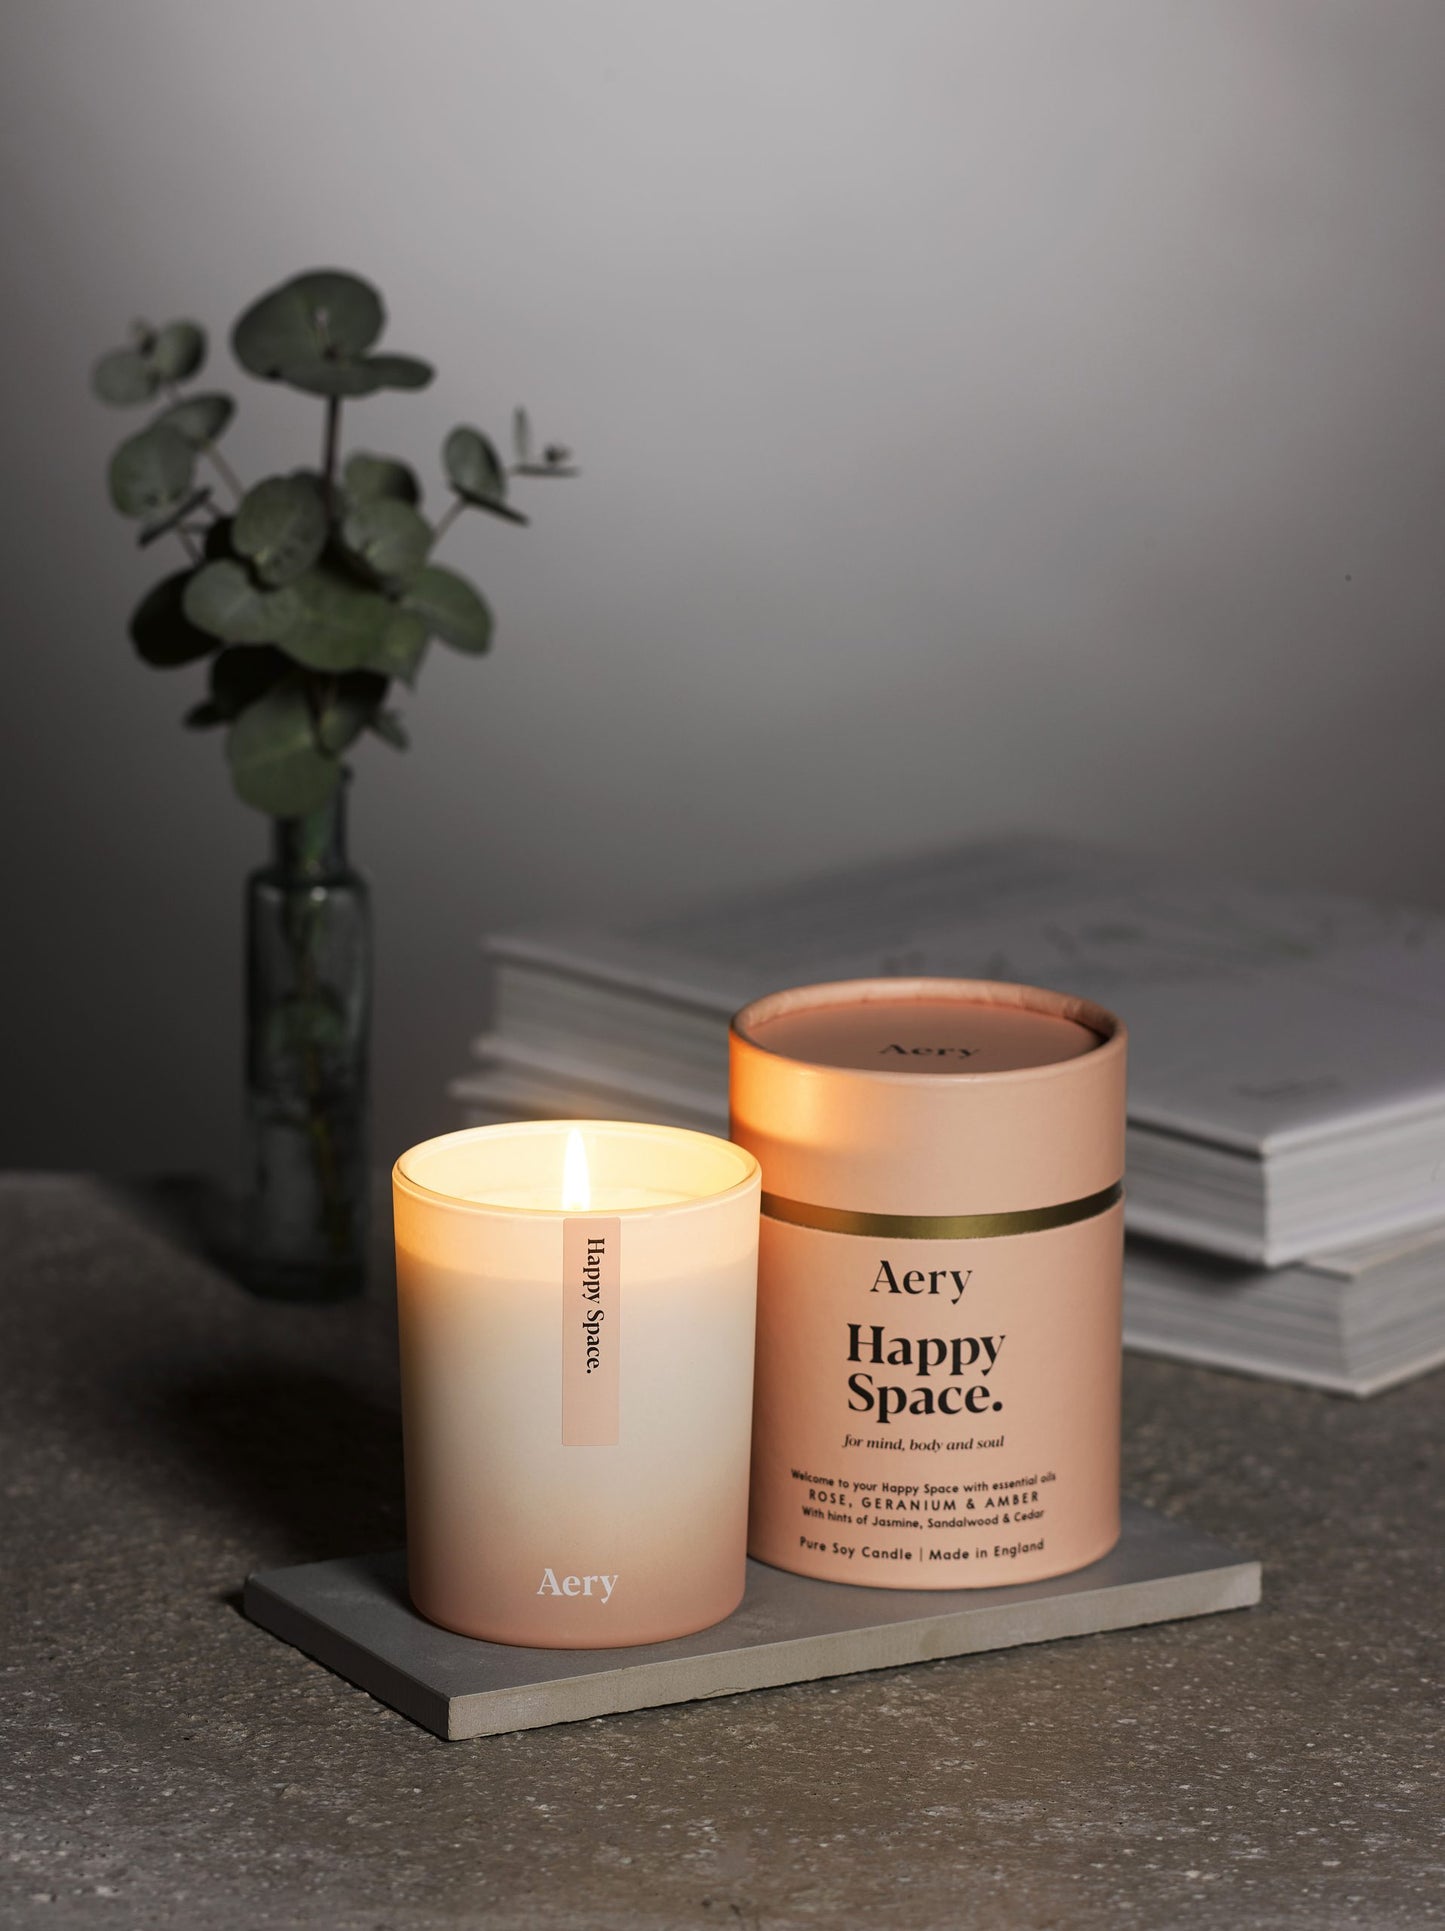 Aery Happy Space Aromatherapy Candle